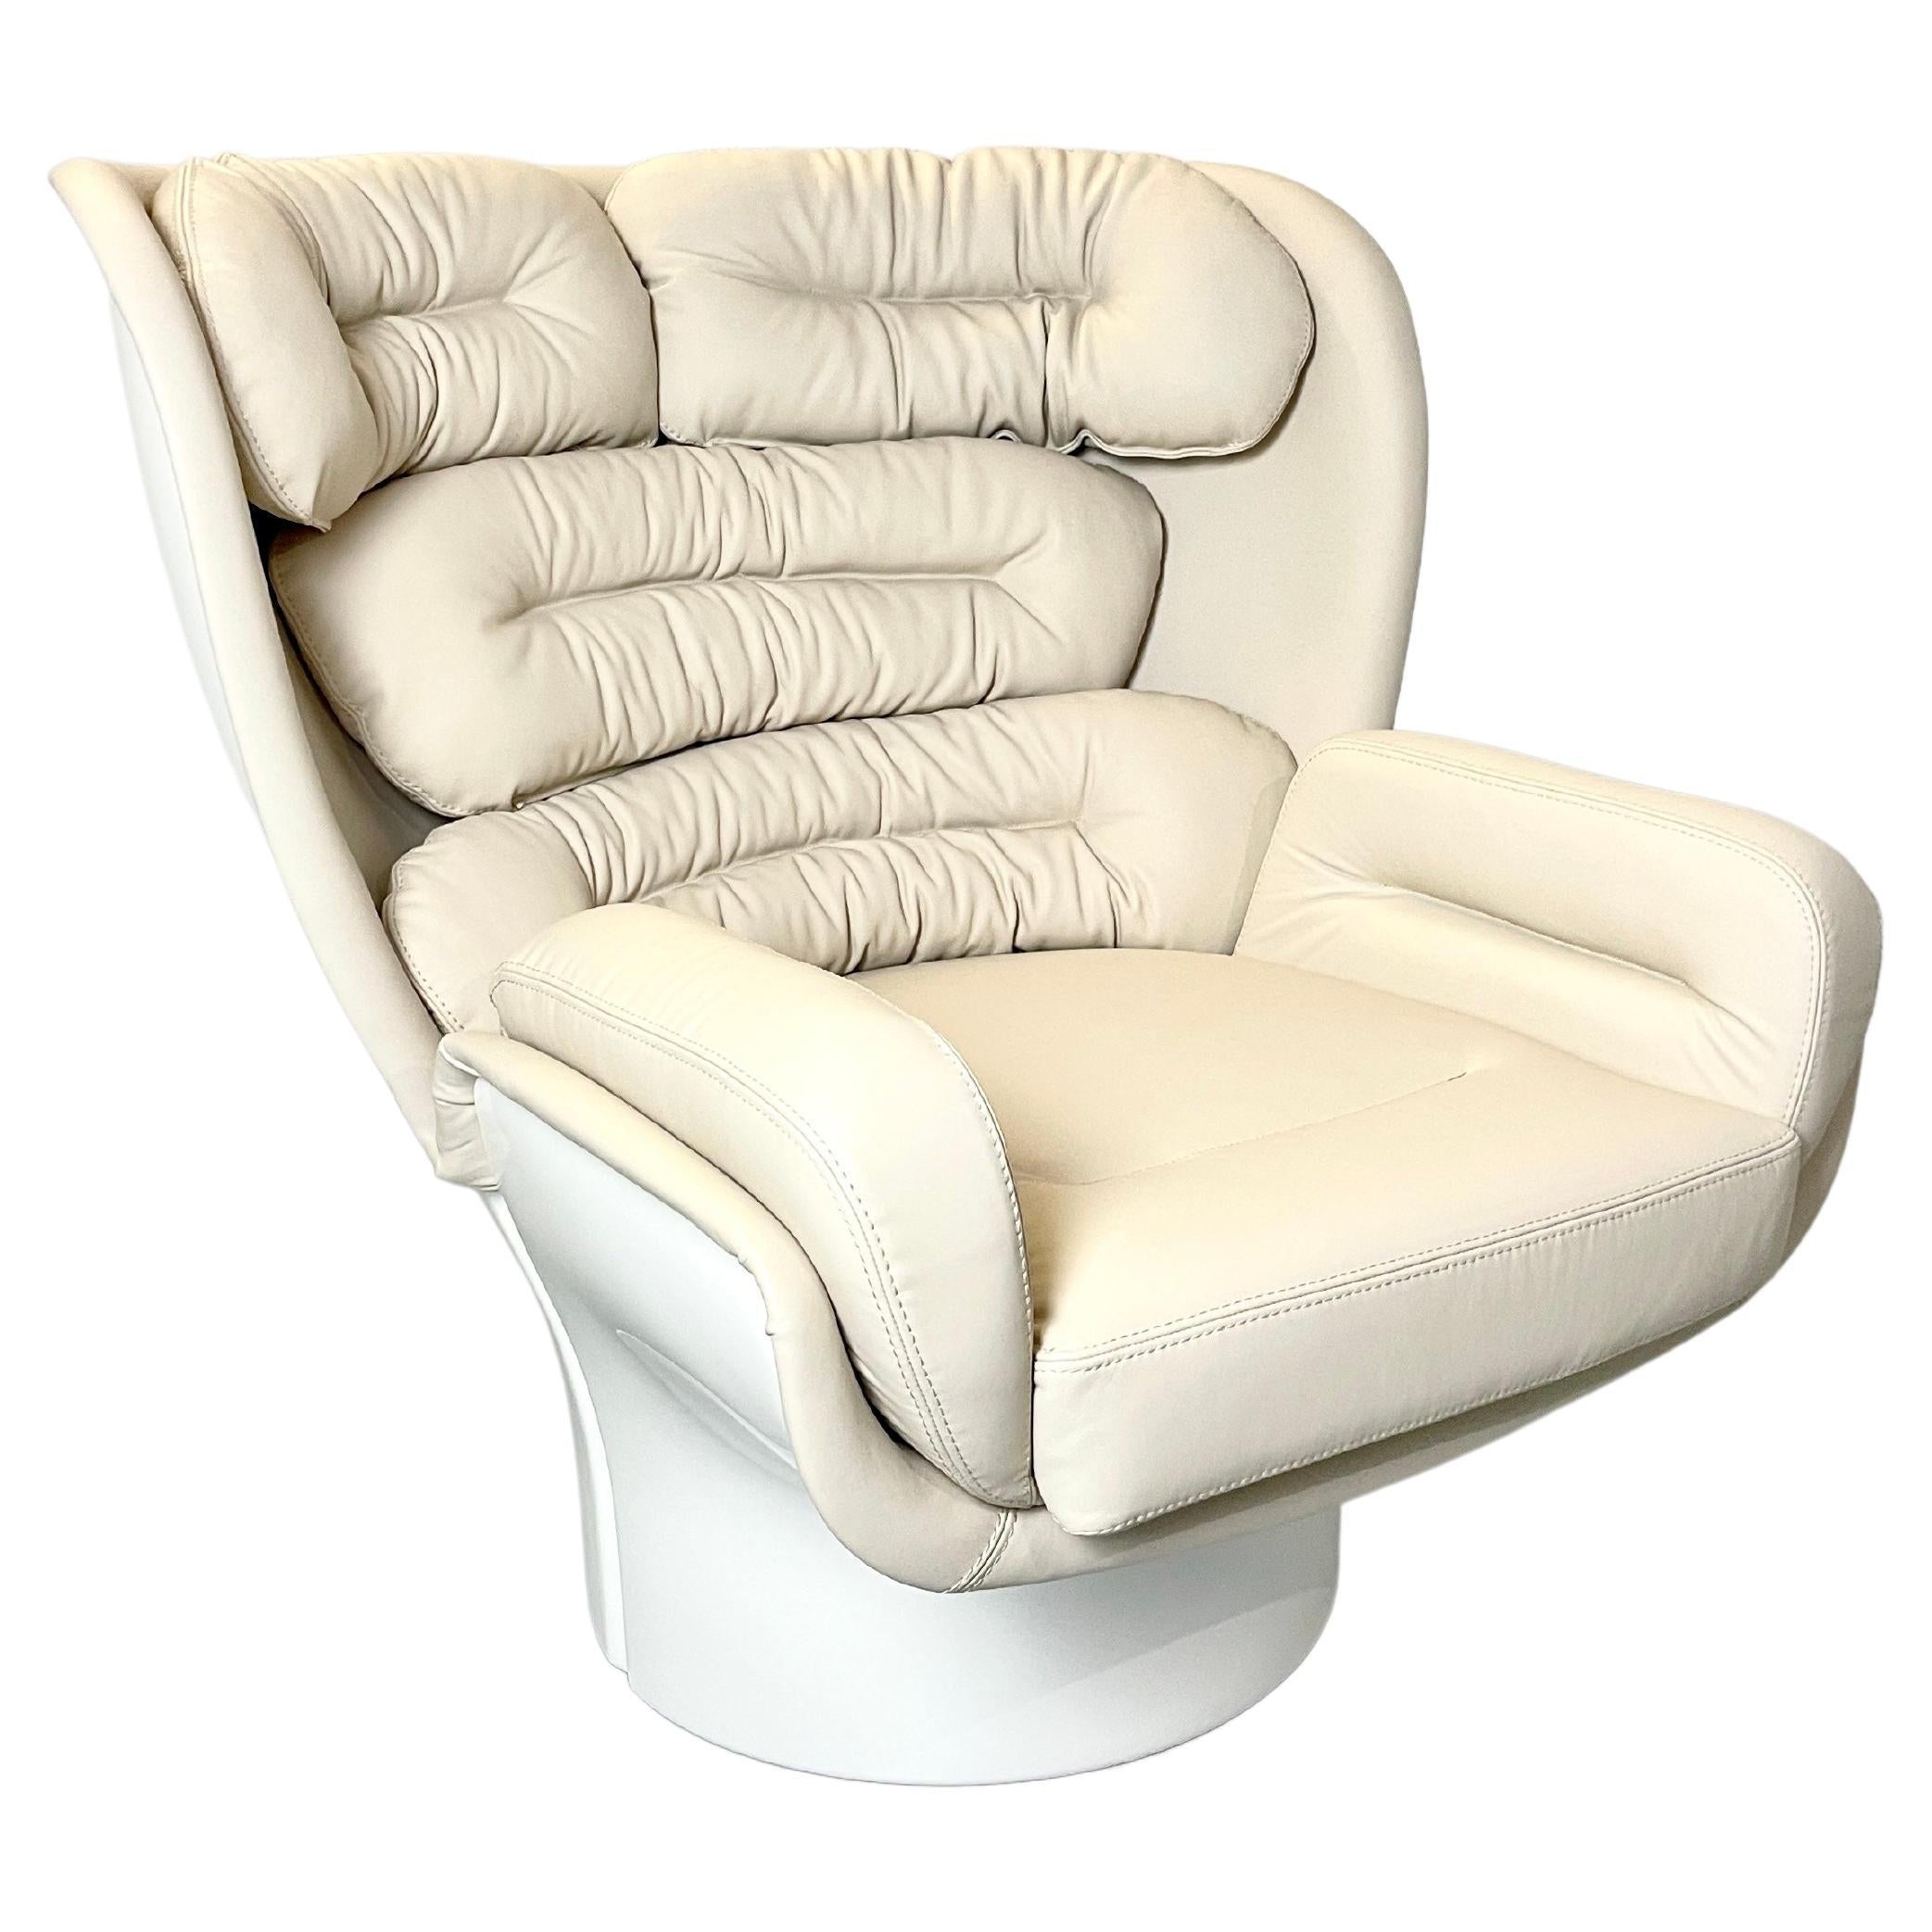 NEW Elda Chair by Joe Colombo for Longhi, Italy  in white & taupe  For Sale